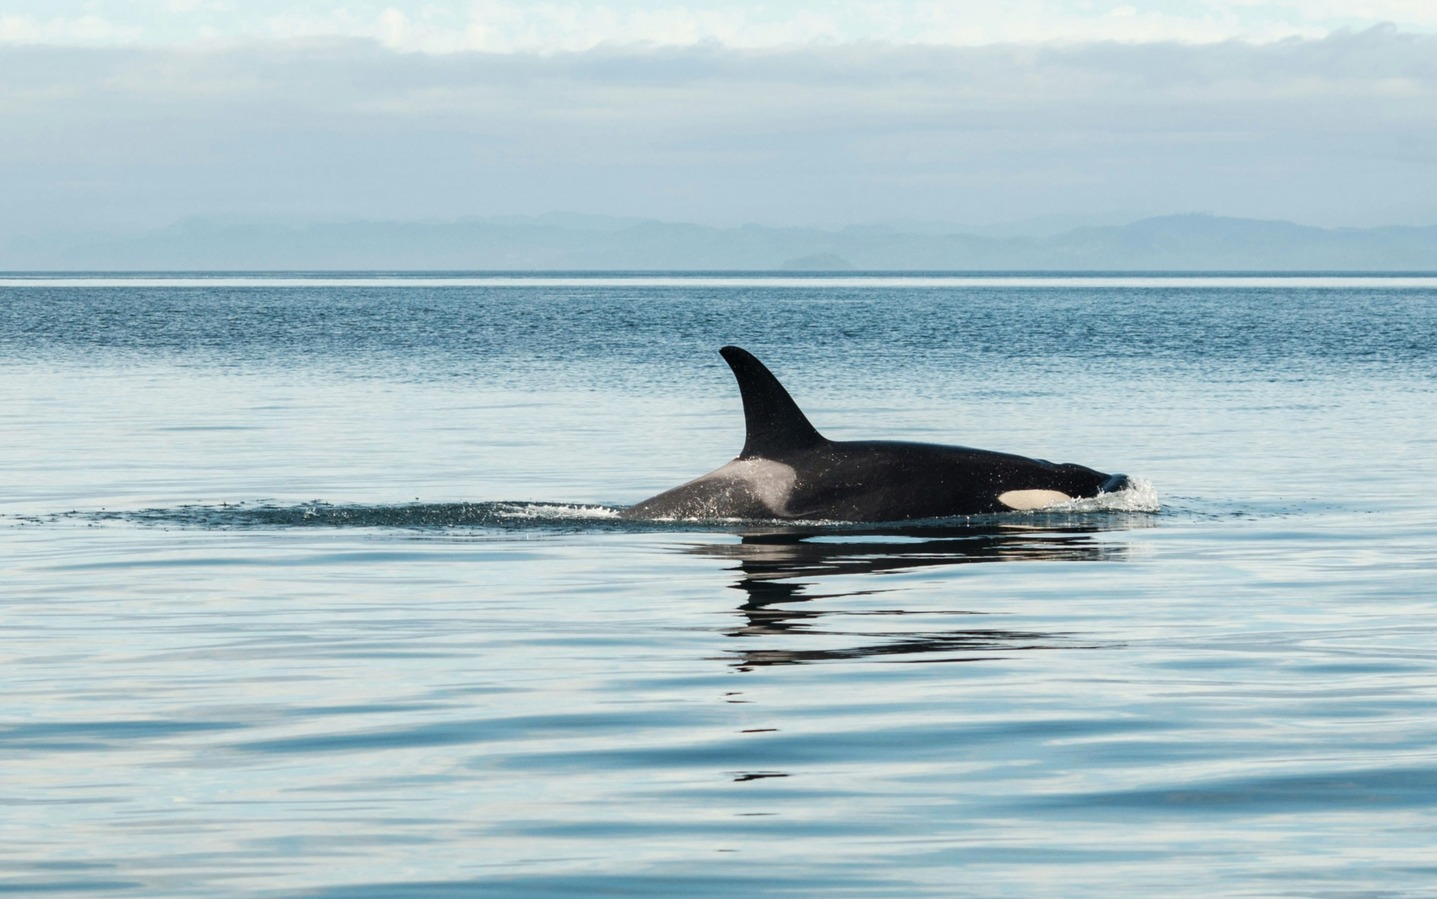 Killer Whales (Orcas) in British Columbia